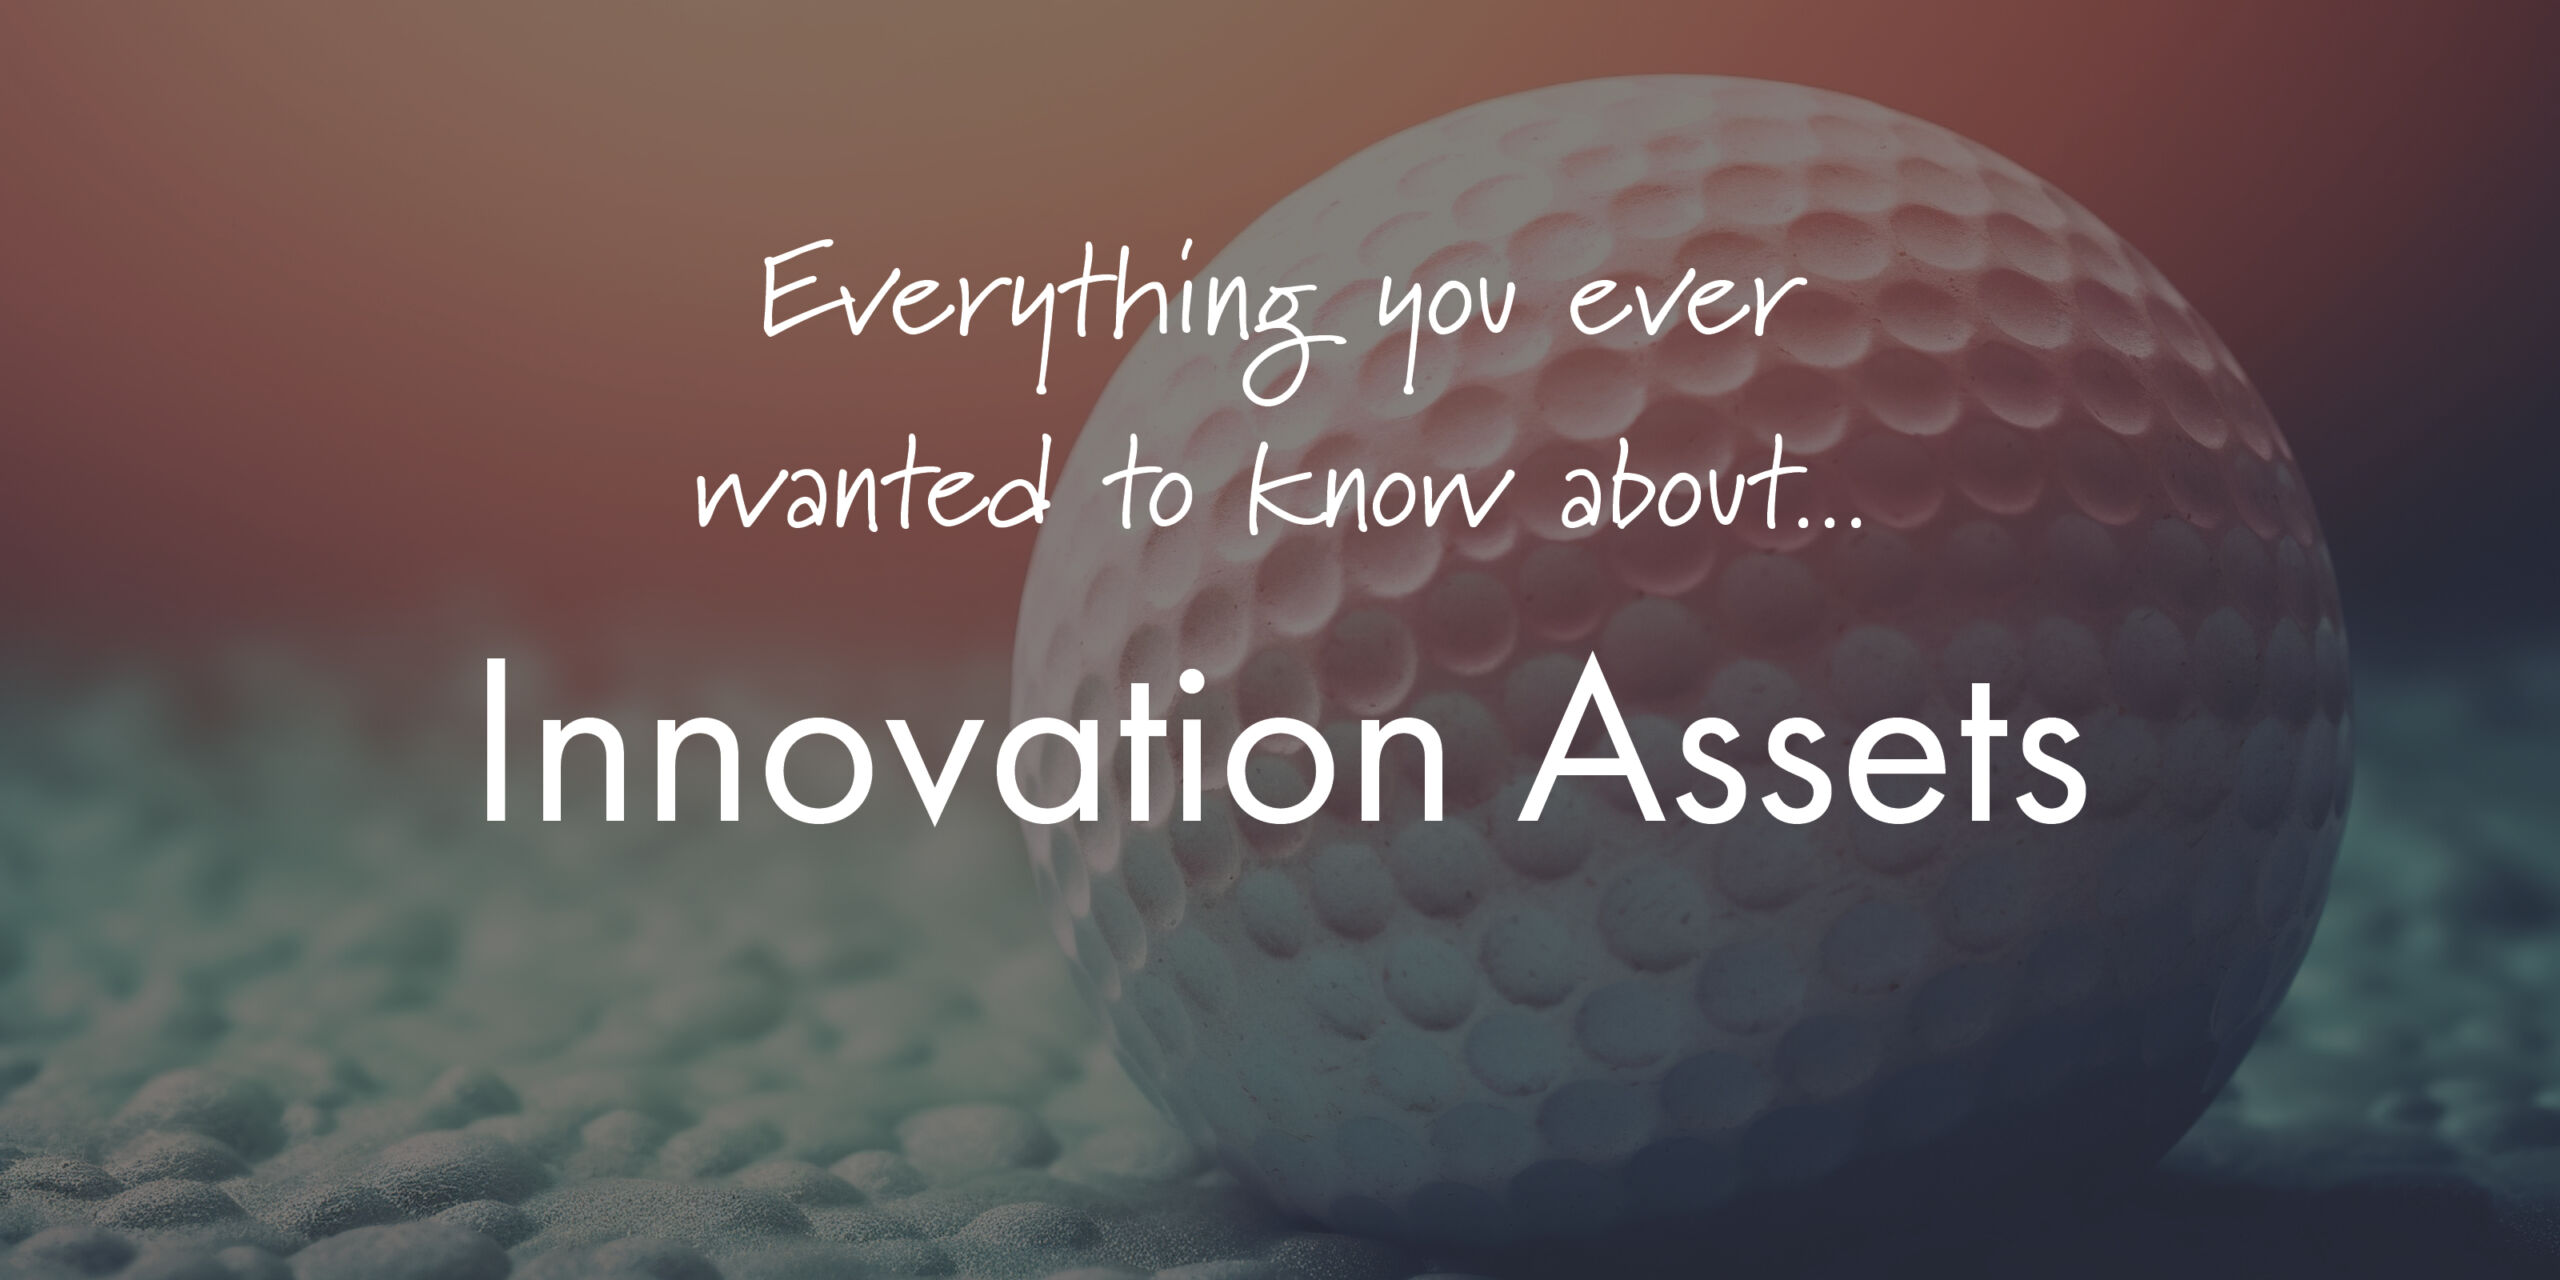 Everything you ever wanted to know about Innovation Assets